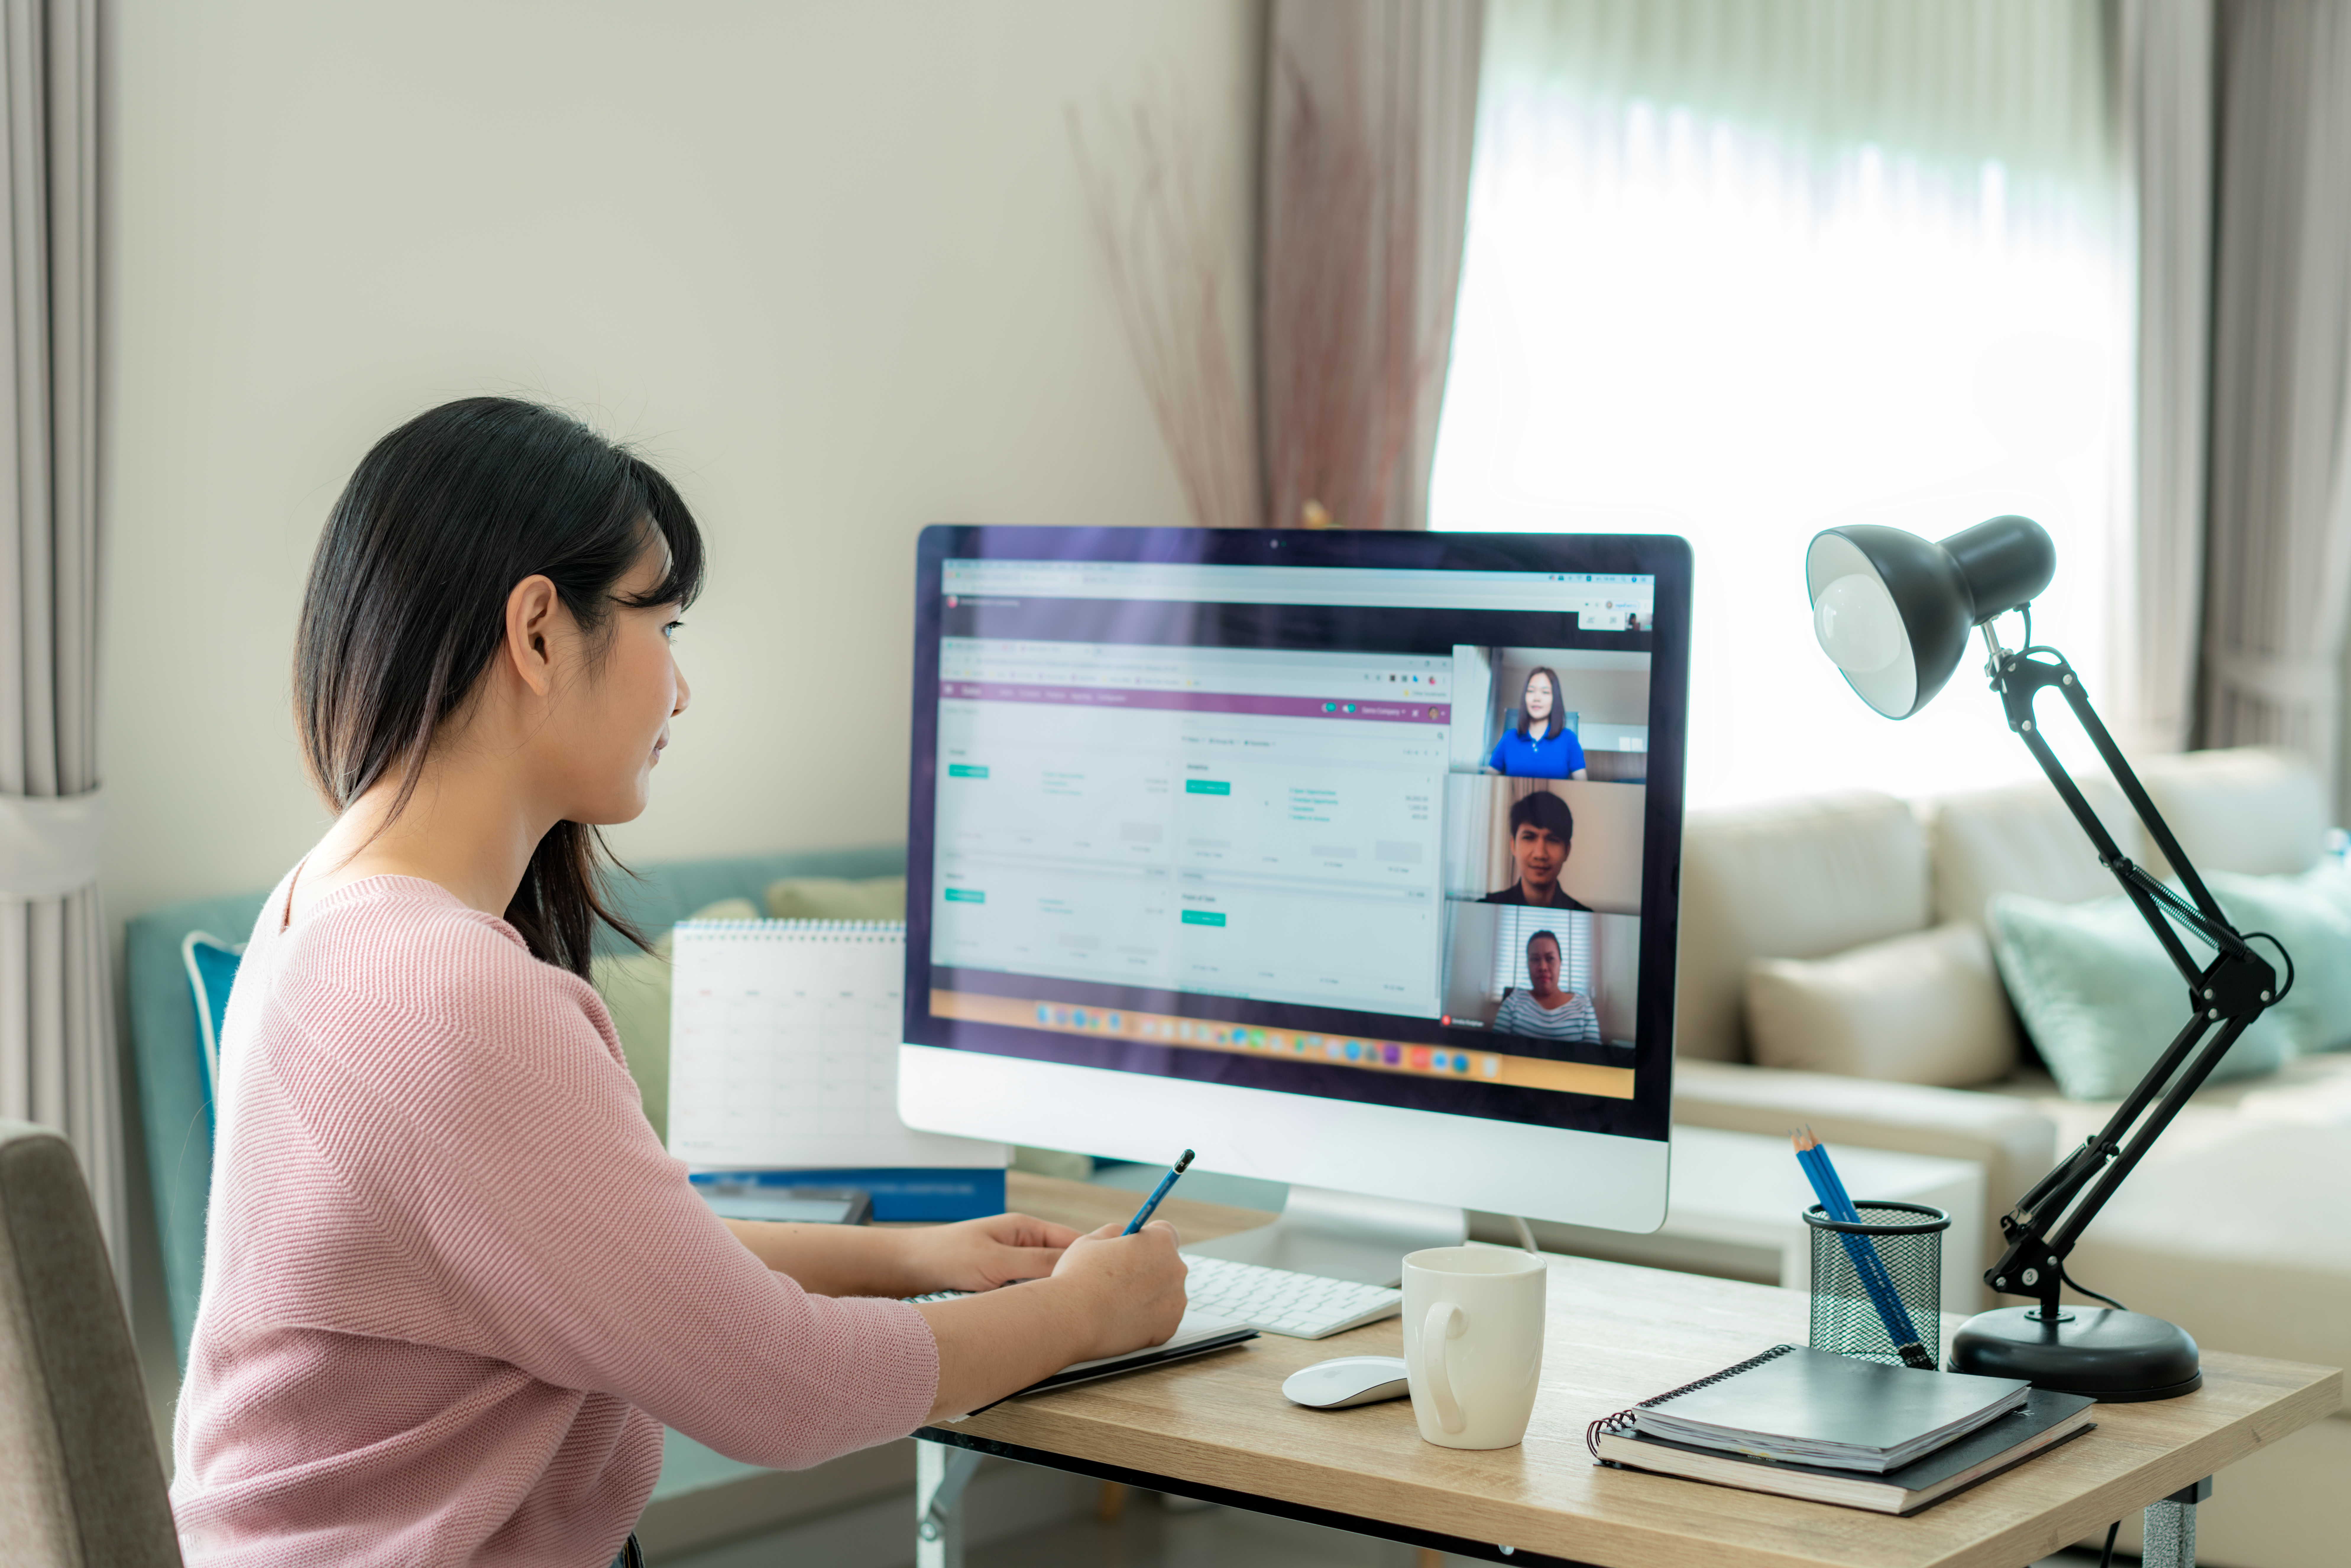 A woman having a work meeting at home via her PC